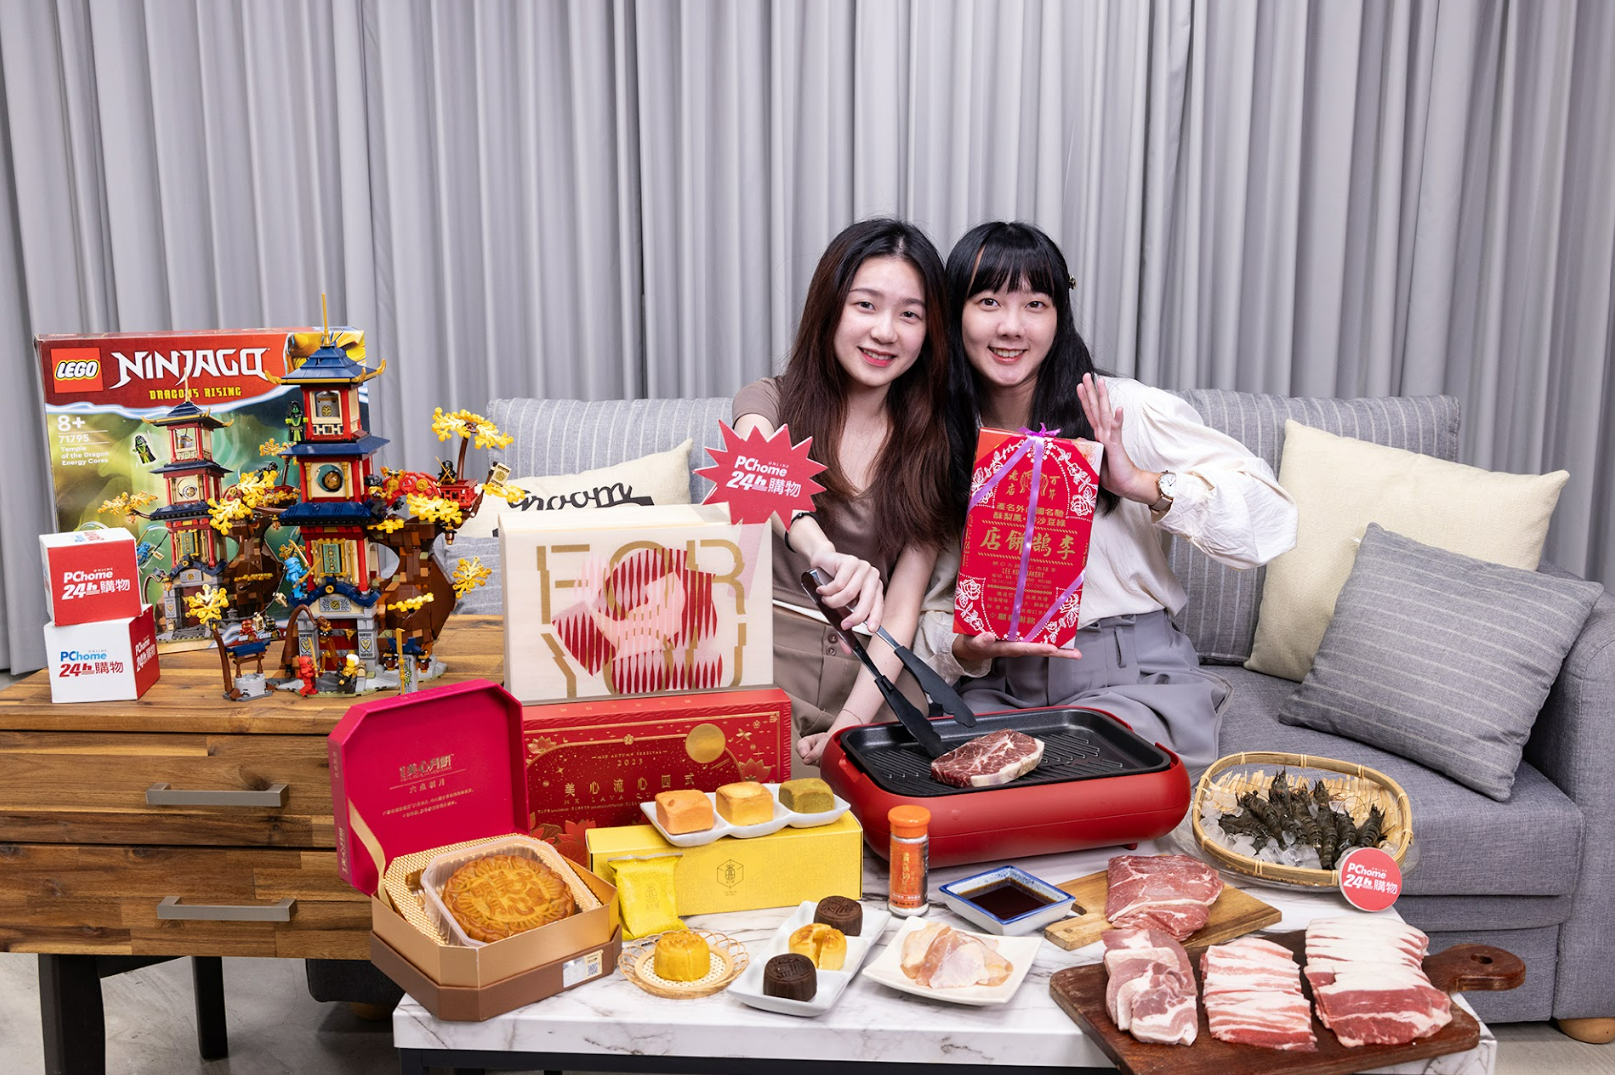 PChome 24h Shopping Offers 24h Constant Rebate up to One Million Dollars for the 99 Shopping Festival. Sales of Pre-Ordered Mid-Autumn Mooncakes Doubles Annually.